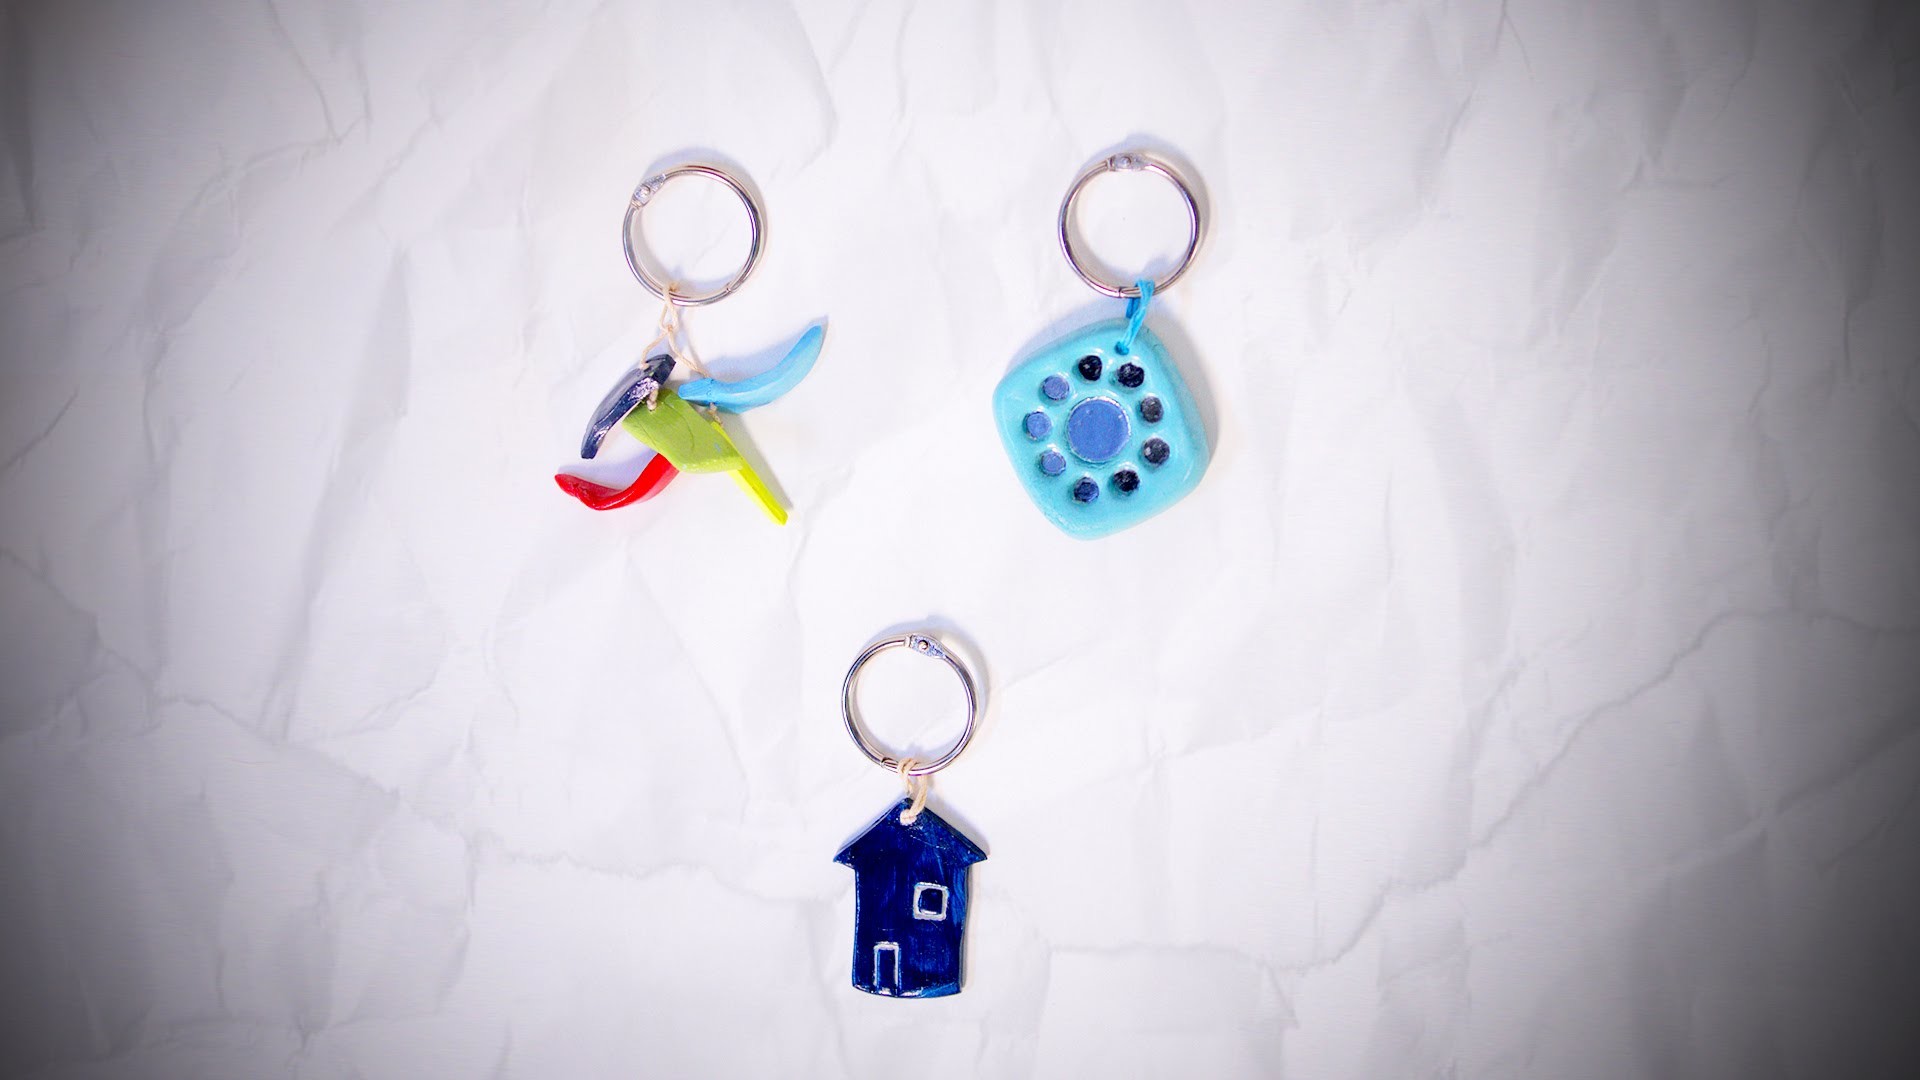 DIY Crafts : How To Make Clay Keychains